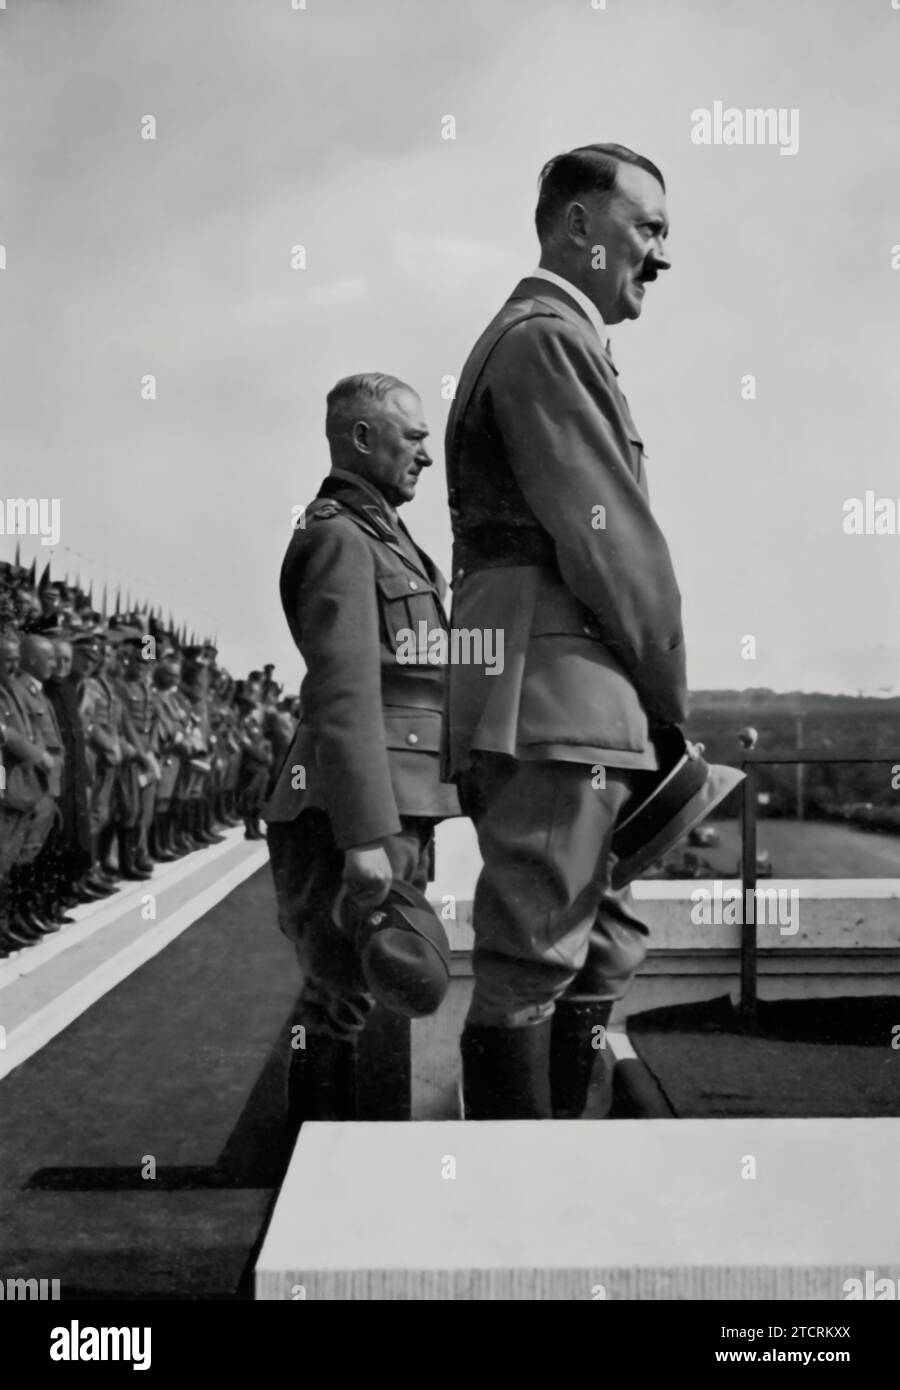 Adolf Hitler is shown alongside Reich Labour Leader Konstantin Hierl in front of 47,000 laborers at the 1935 Reichsparteitag (Nazi Party Rally). This gathering was a significant display of organized labor under the Nazi regime, with the massive assembly of workers symbolizing unity and strength. The presence of Hitler and Hierl at this event highlights the regime's emphasis on labor as a key component of its social and economic policies. Stock Photo